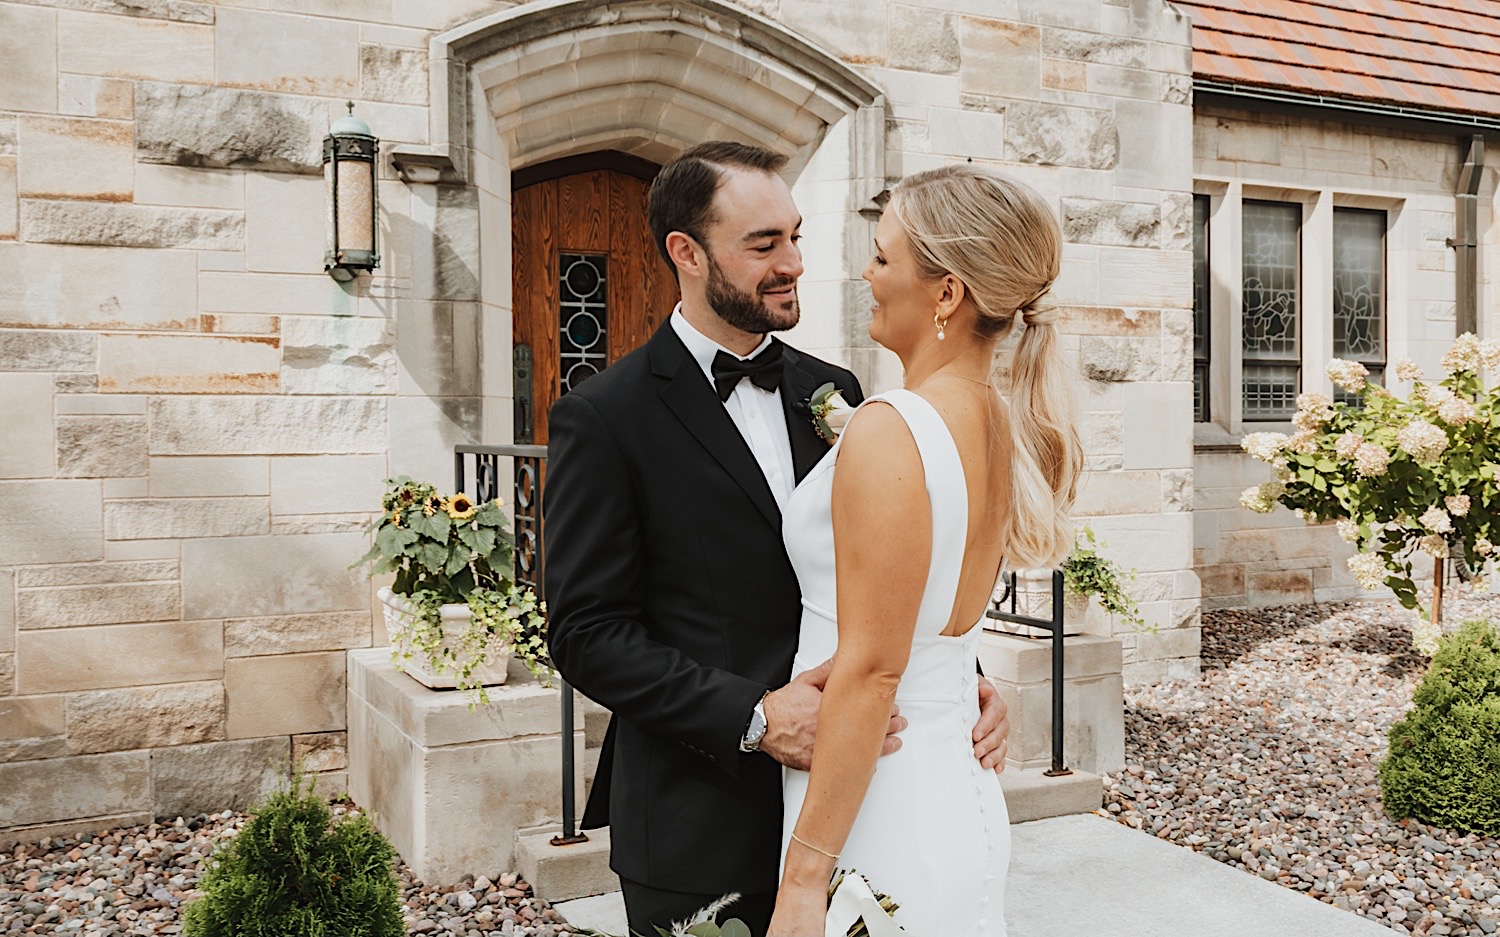 A bride and groom embrace and smile at one another outside a church